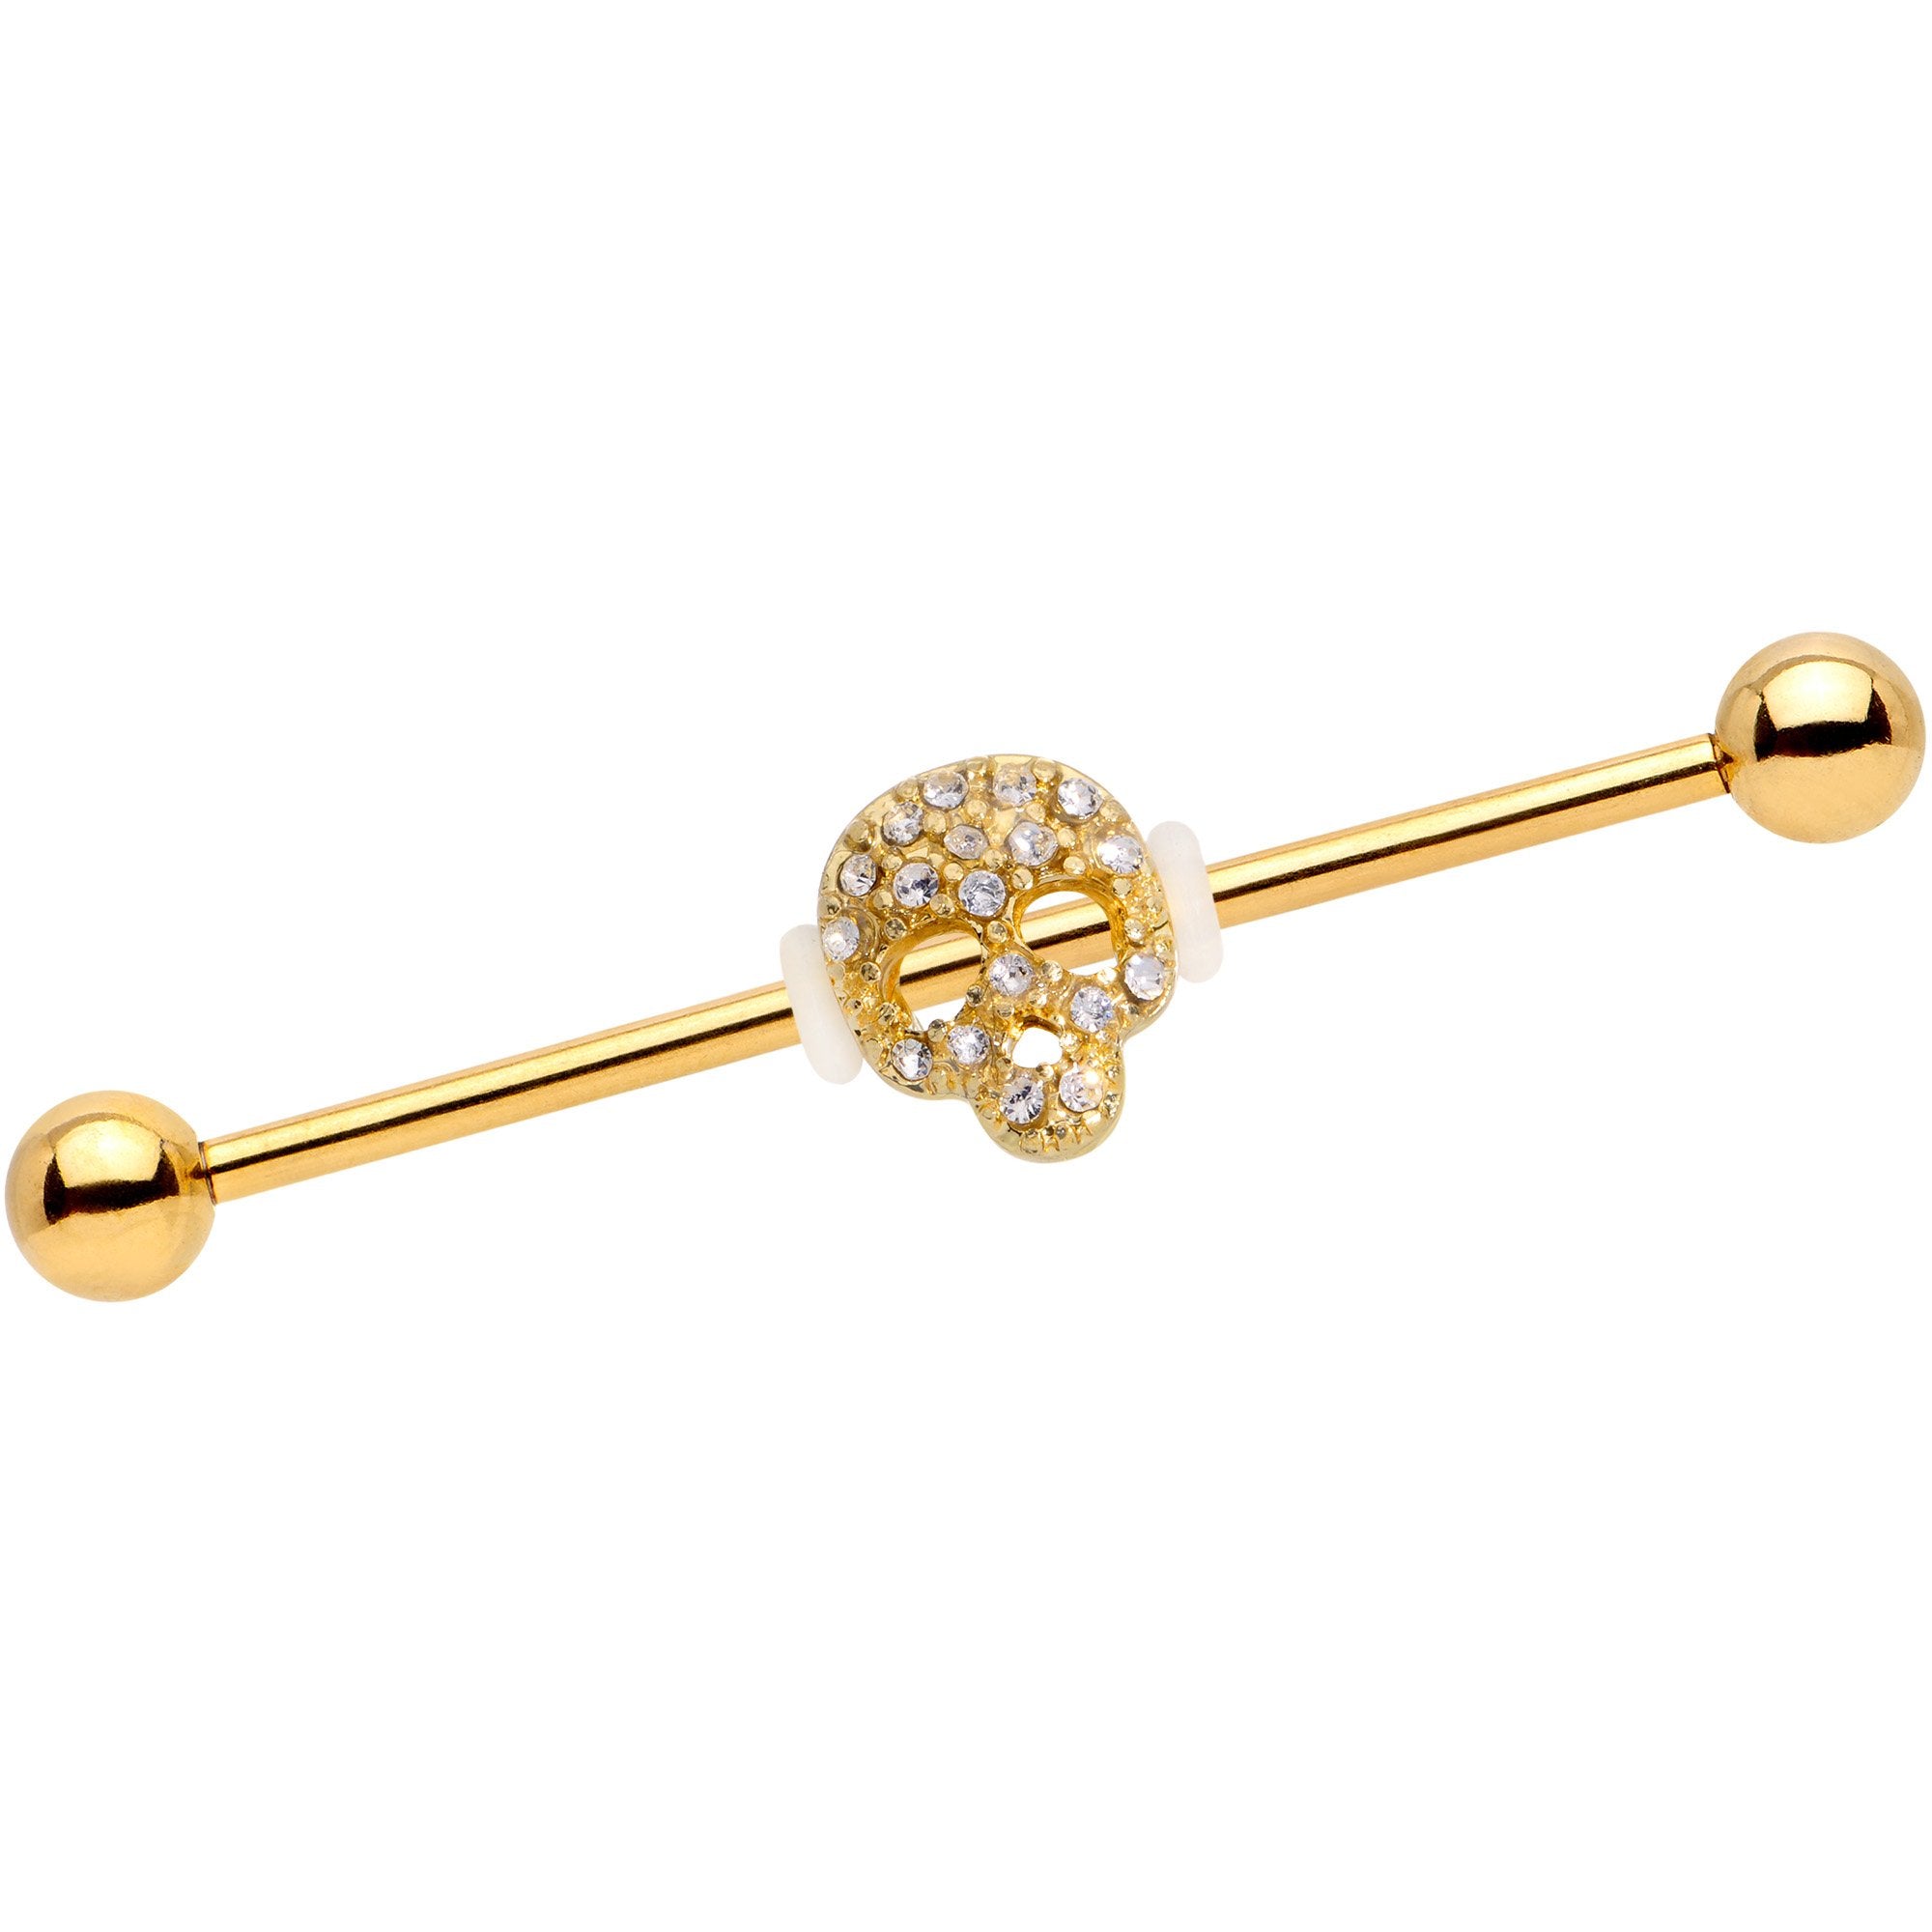 Clear Gem Skull Charm Gold Anodized Straight Industrial Barbell 38mm